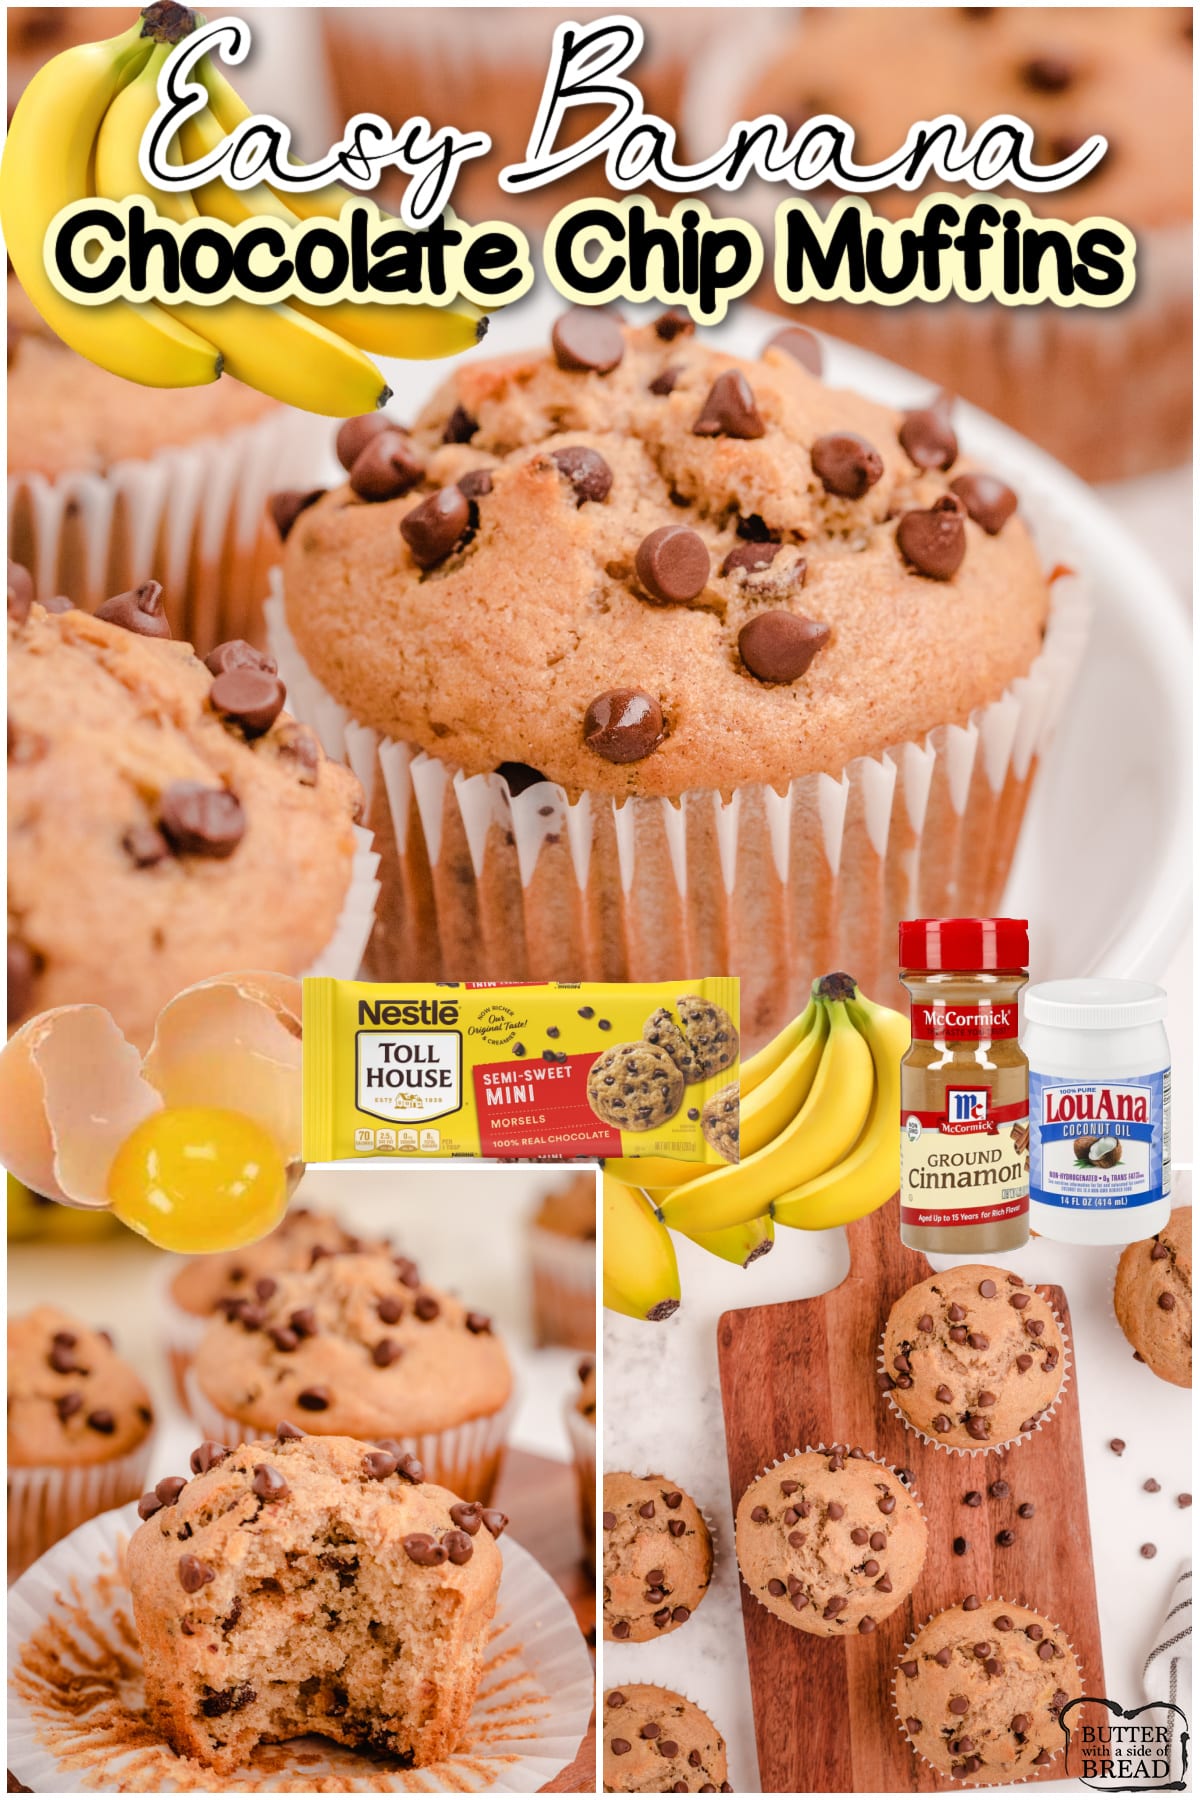 Banana Chocolate Chip Muffins made easy with ripe bananas, brown sugar, milk, eggs & oil. Homemade cinnamon spiced banana muffins dotted with chocolate chips perfect for breakfast!